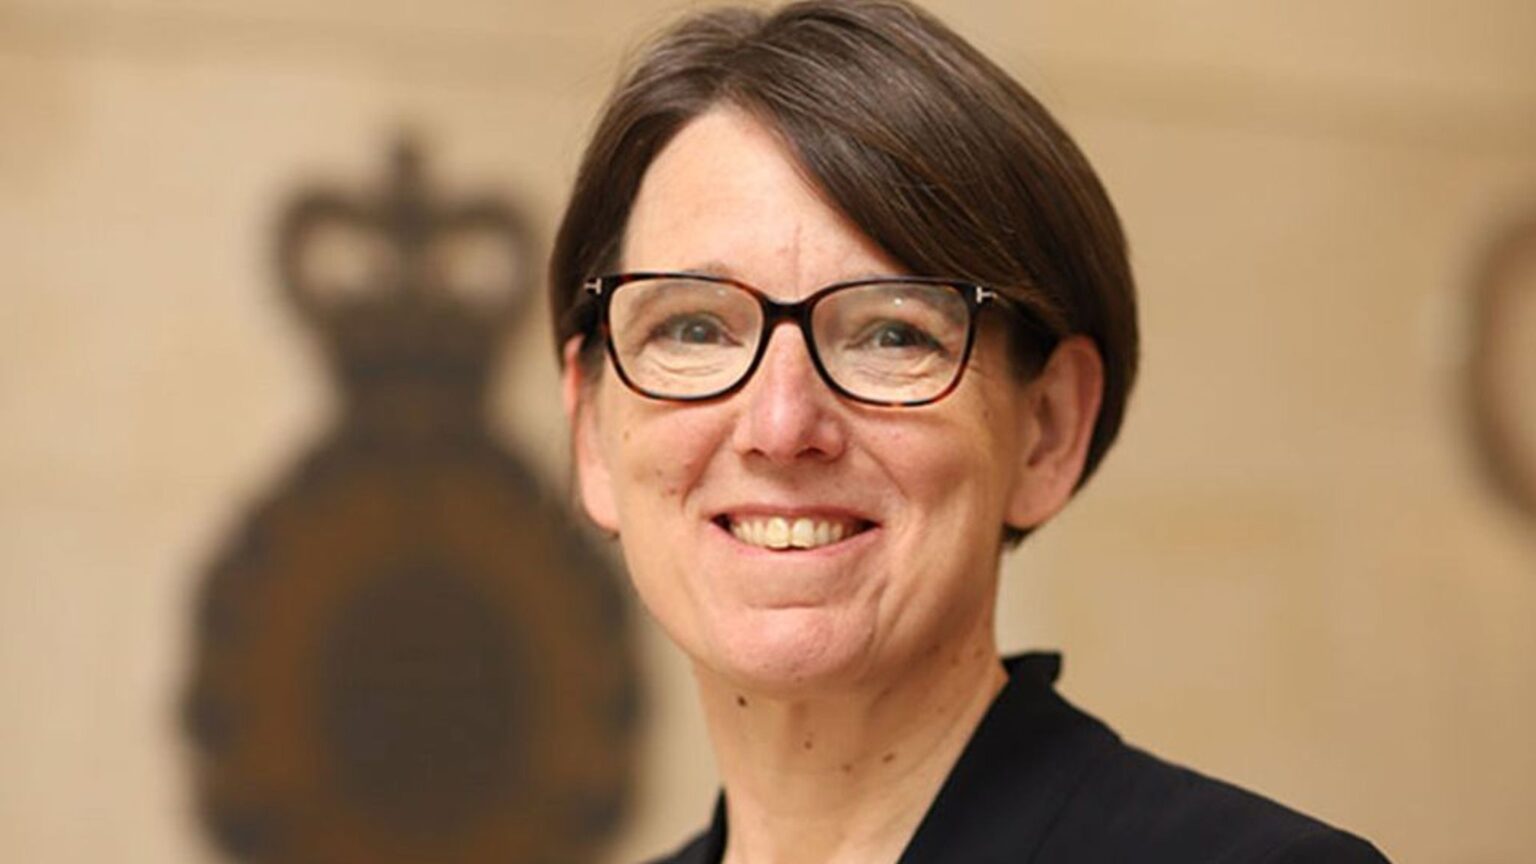 britain-named-anne-keast-butler-as-the-first-female-director-of-gchq